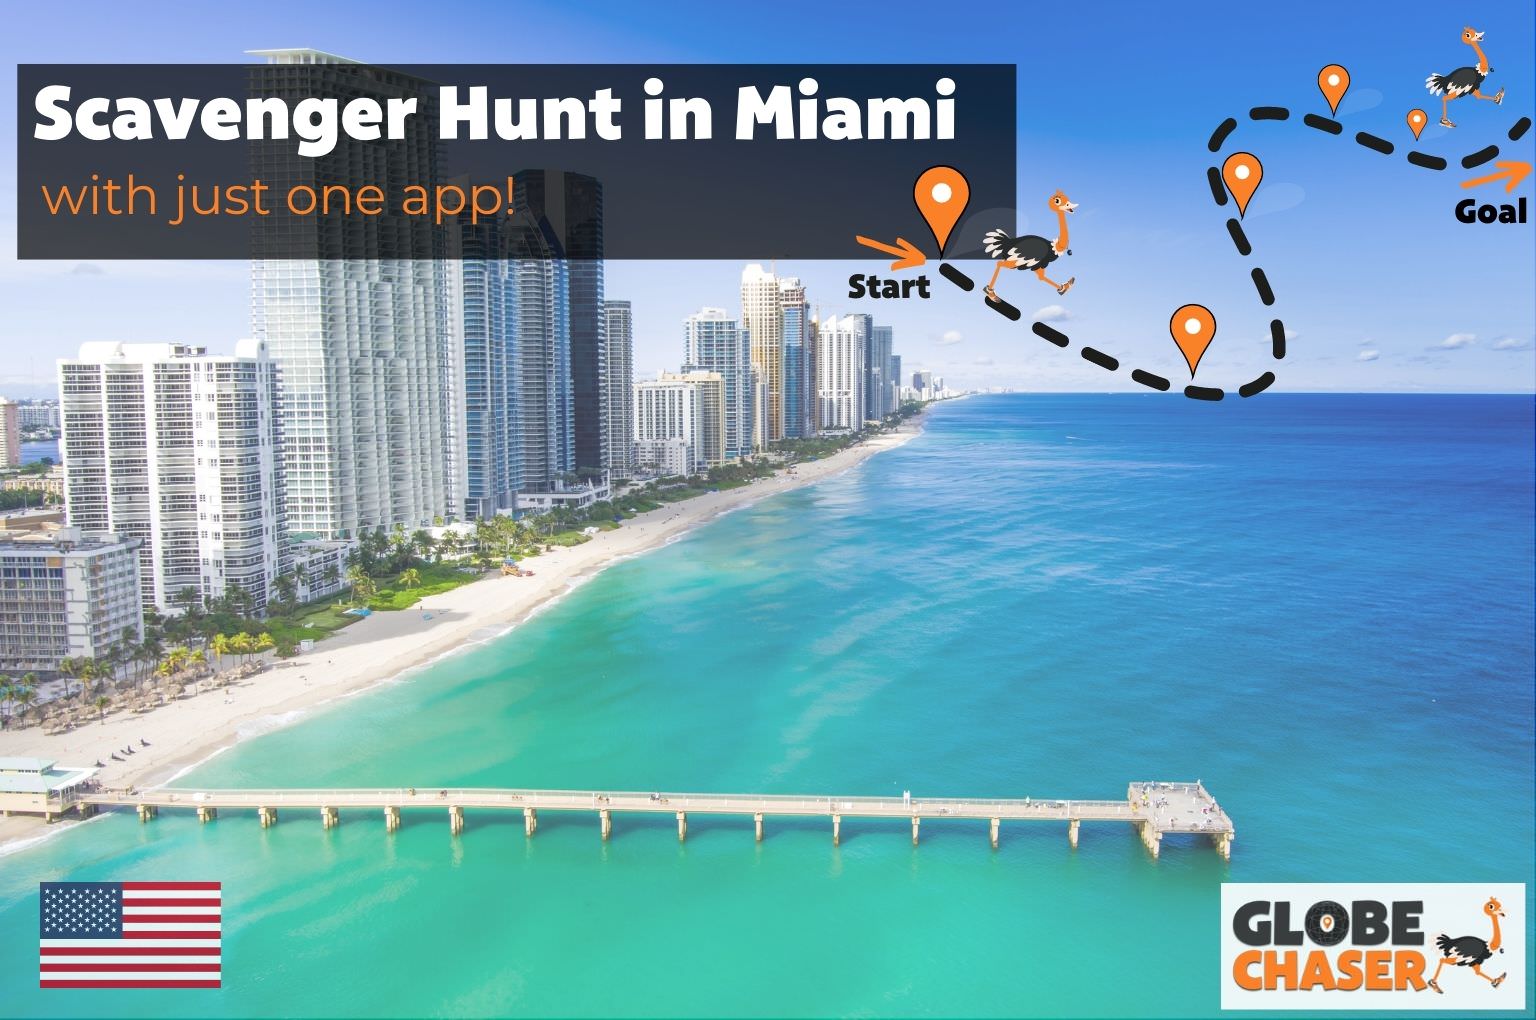 Scavenger Hunt in Miami, USA - Family Activities with the Globe Chaser App for Outdoor Fun